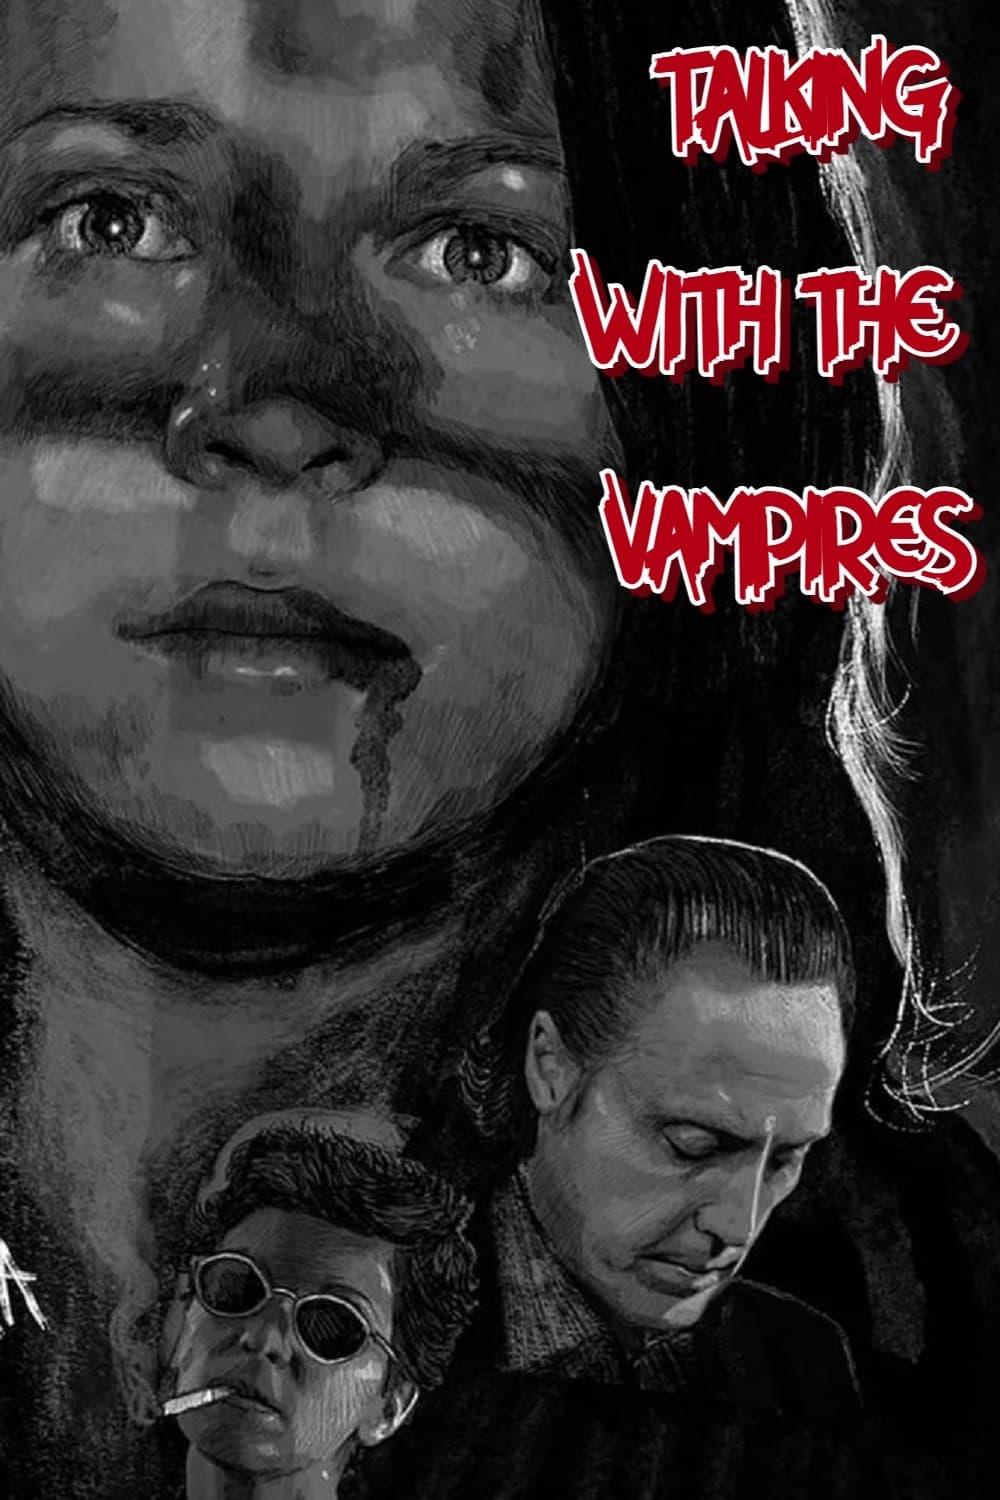 Talking with the Vampires poster